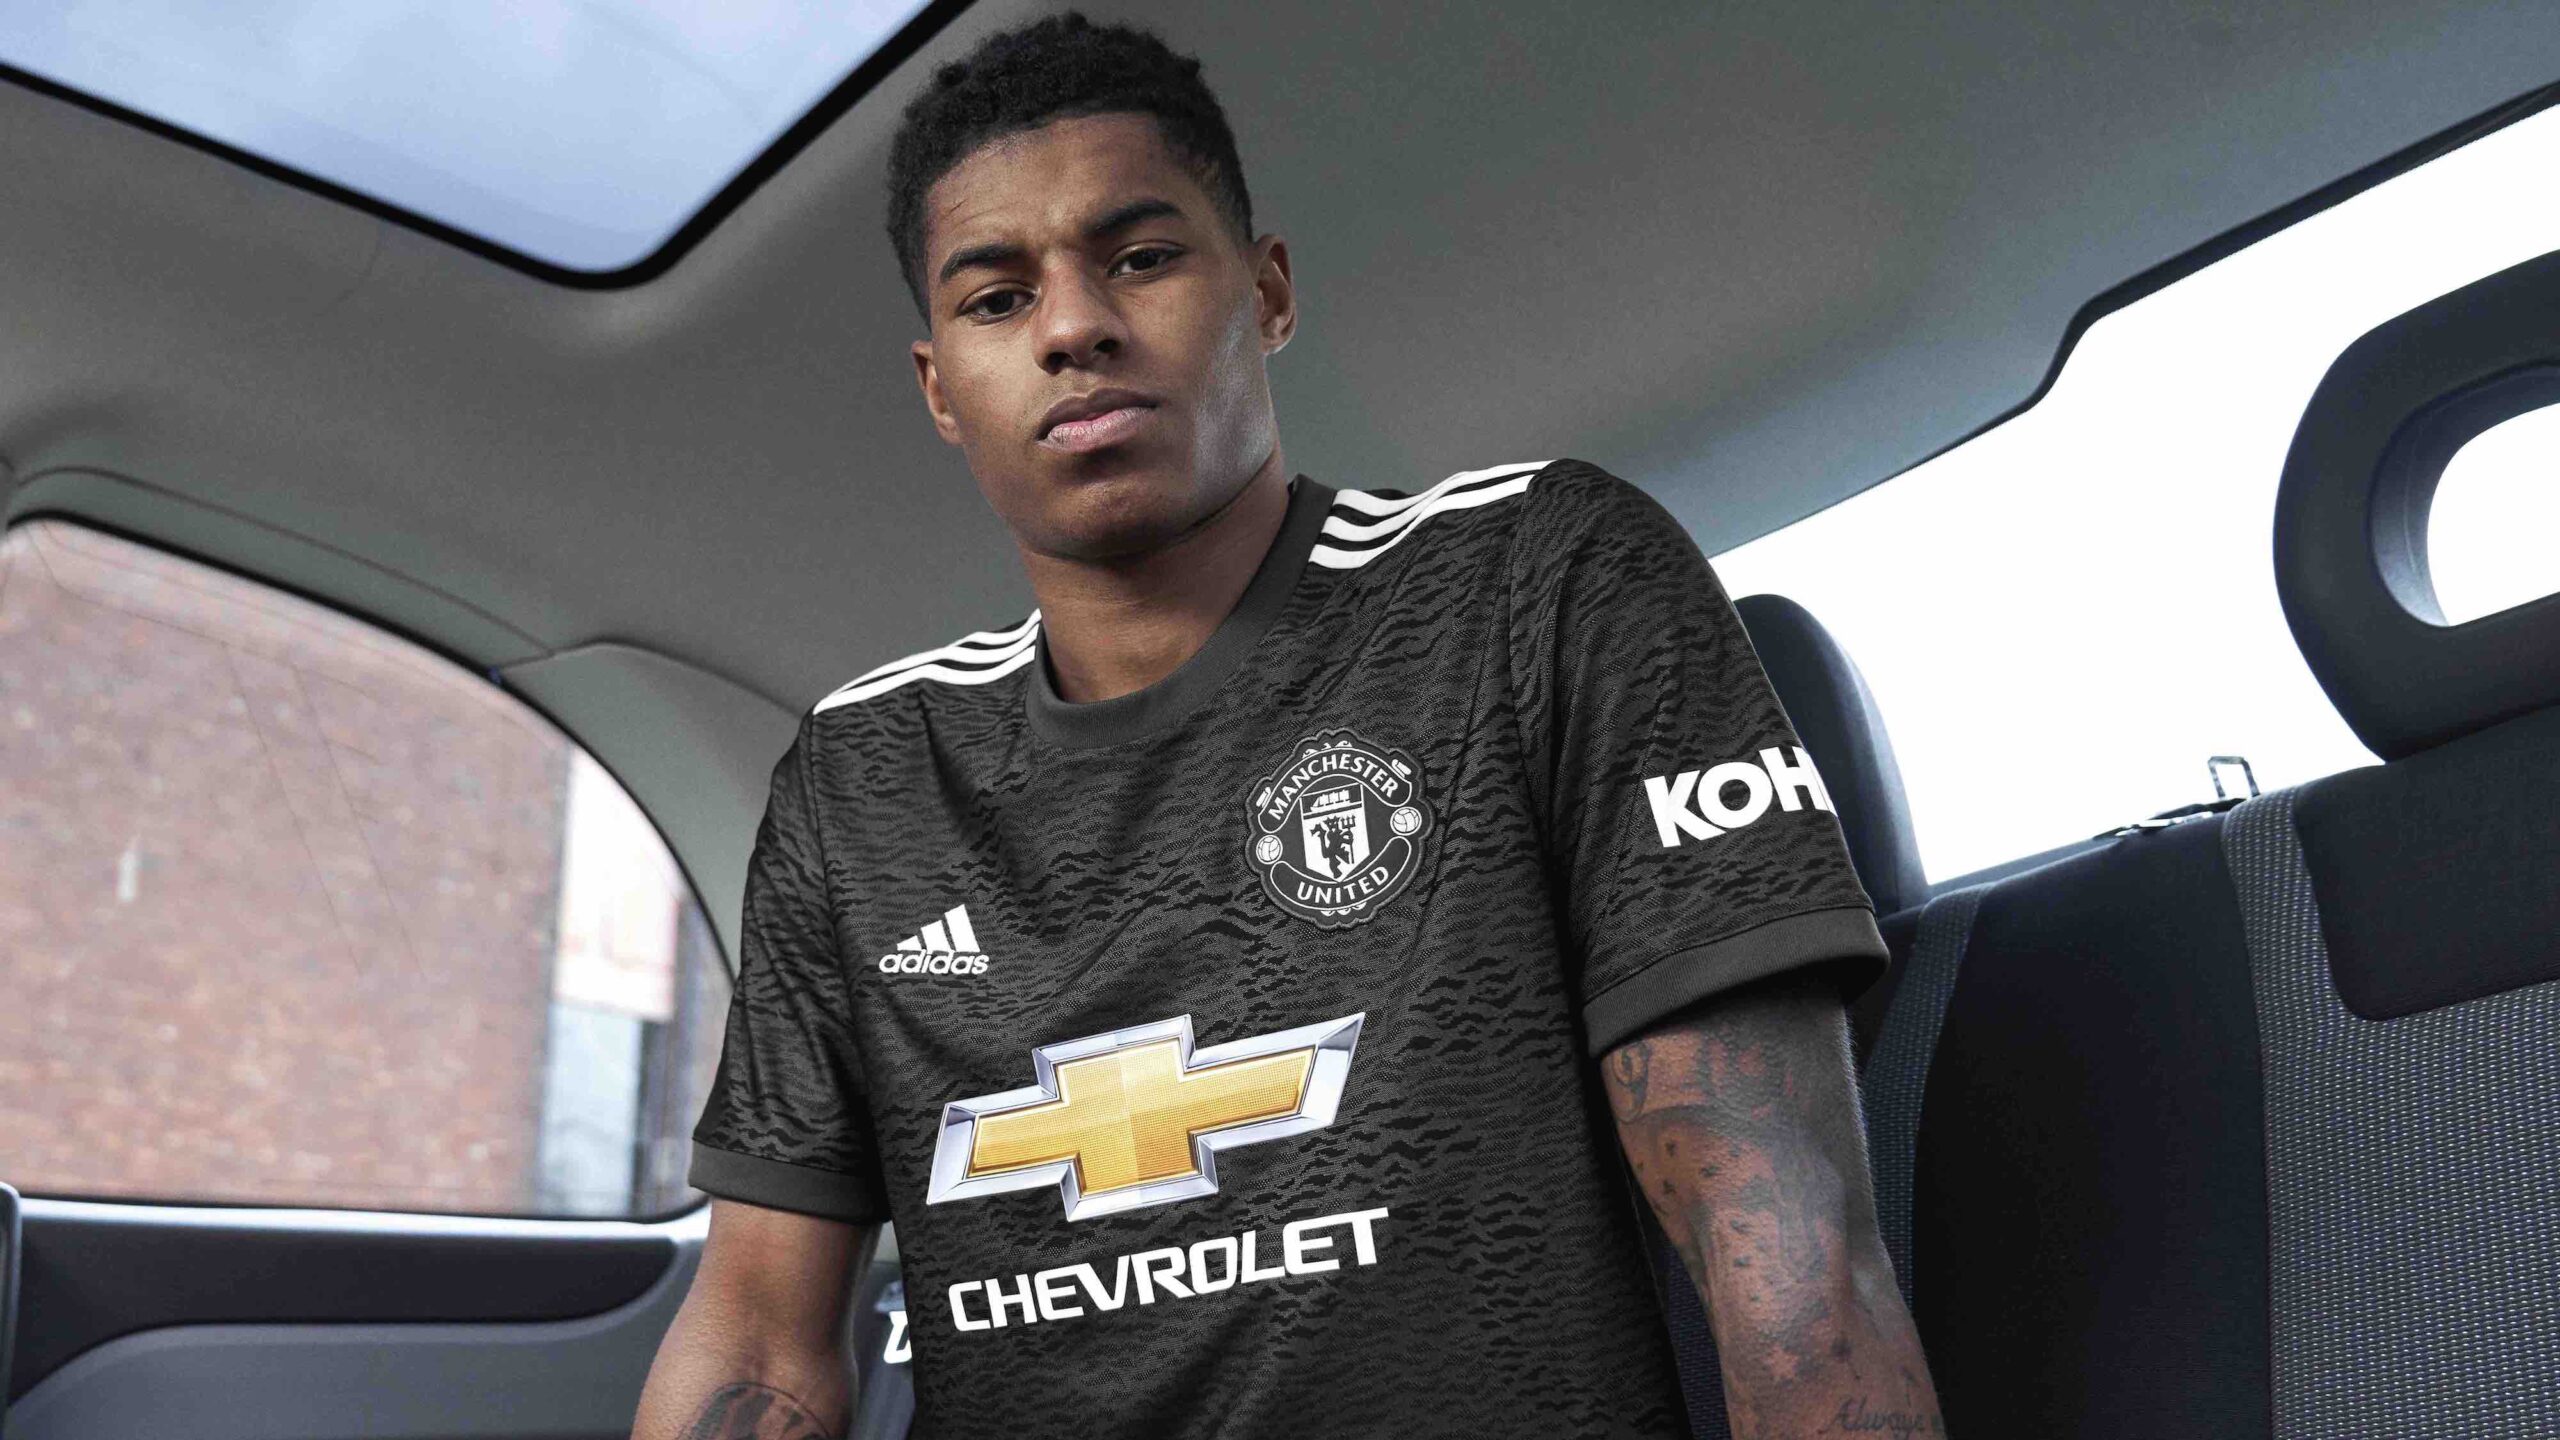 Manchester United 2020/21 Away Jersey Revealed